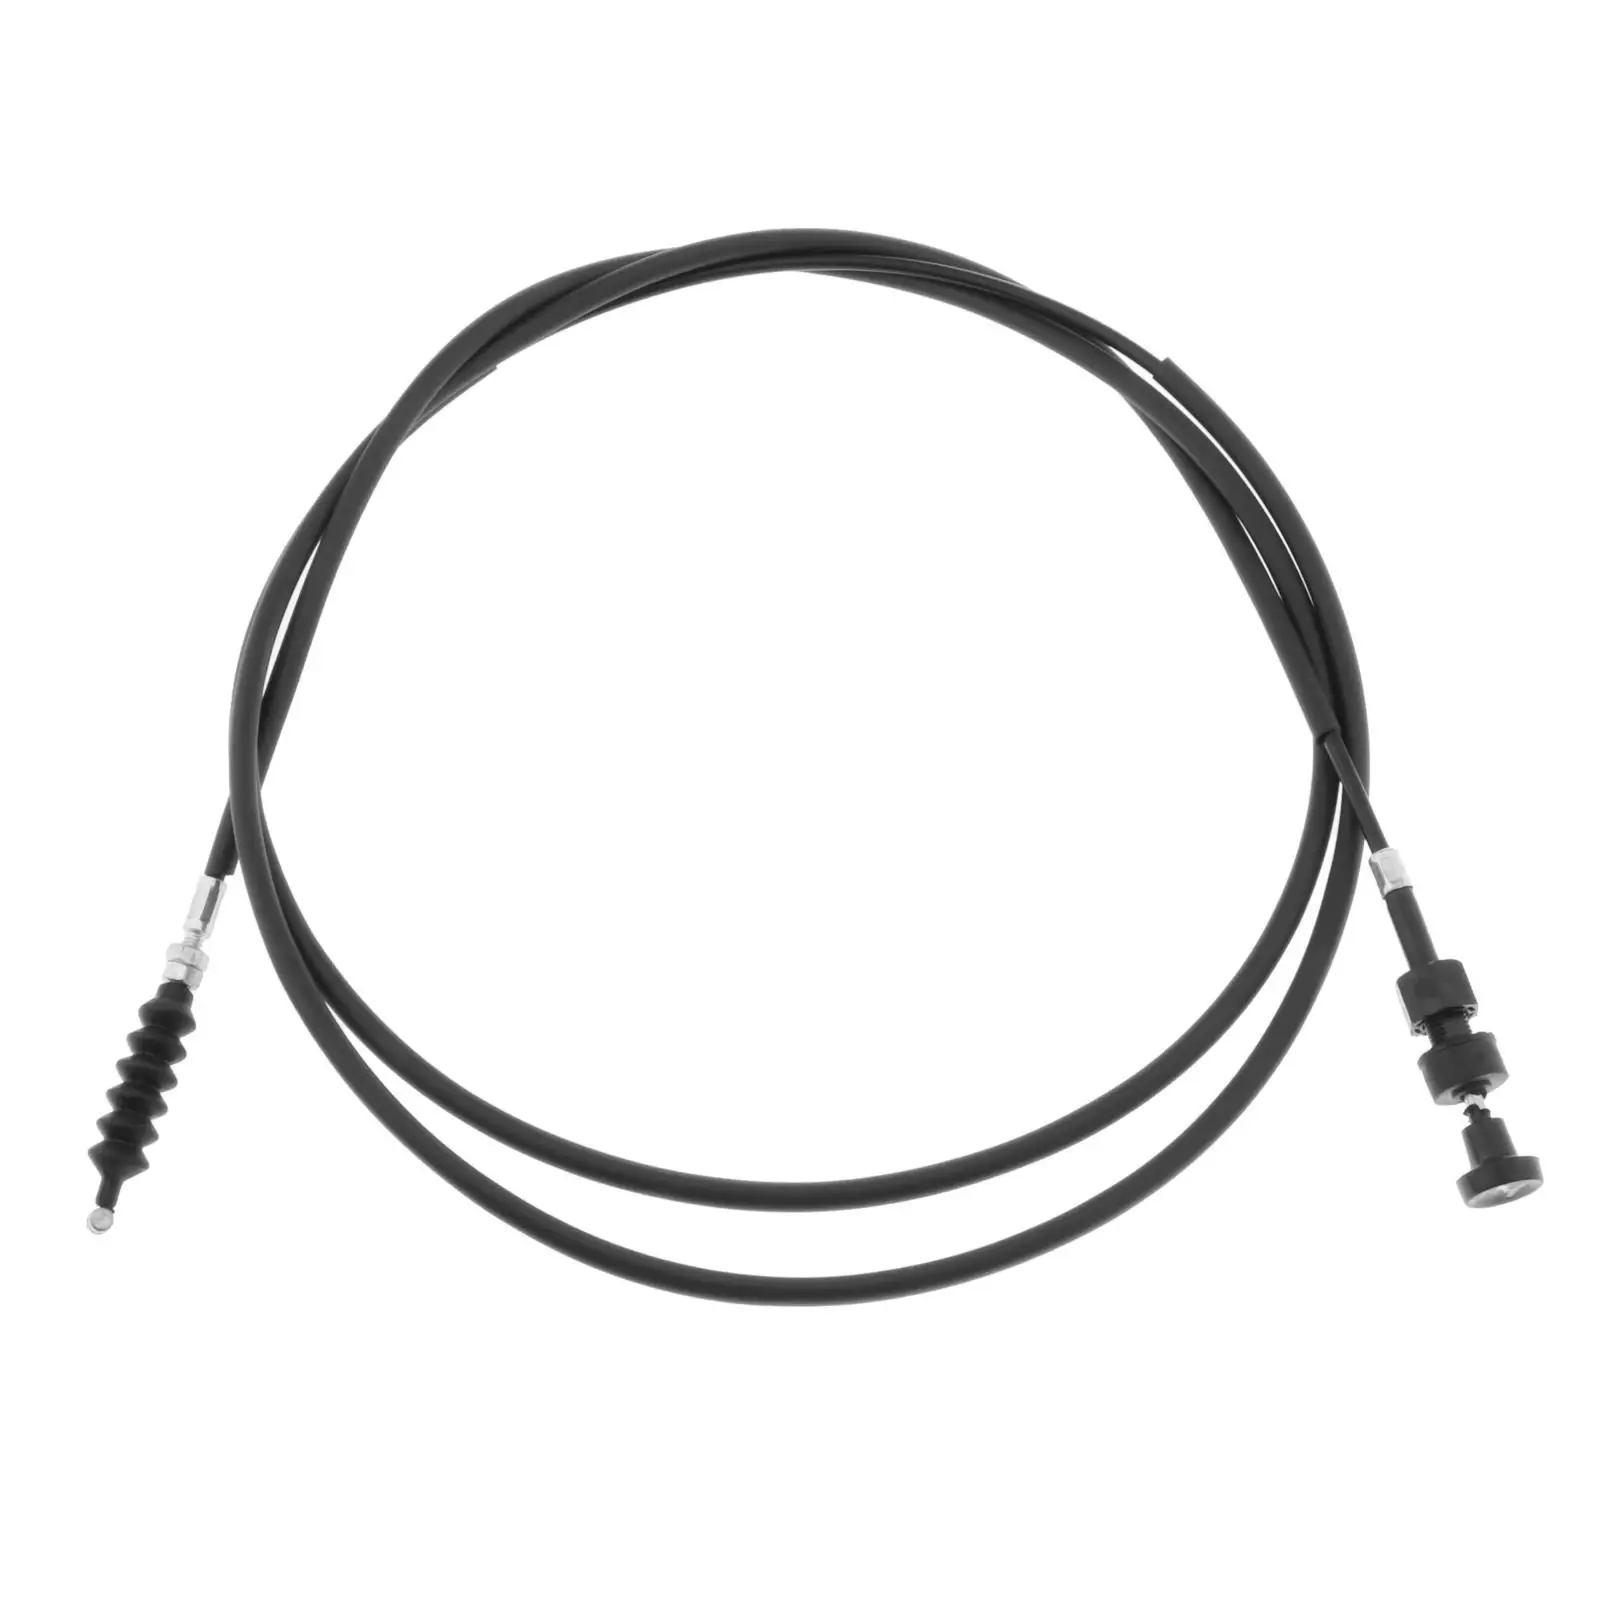 

Choke Starter Cable Replaces 54017-1208 Fit for Kawasaki 3000 3010 3020 4000 4010 Mule 2001-2009, Replace Accessories